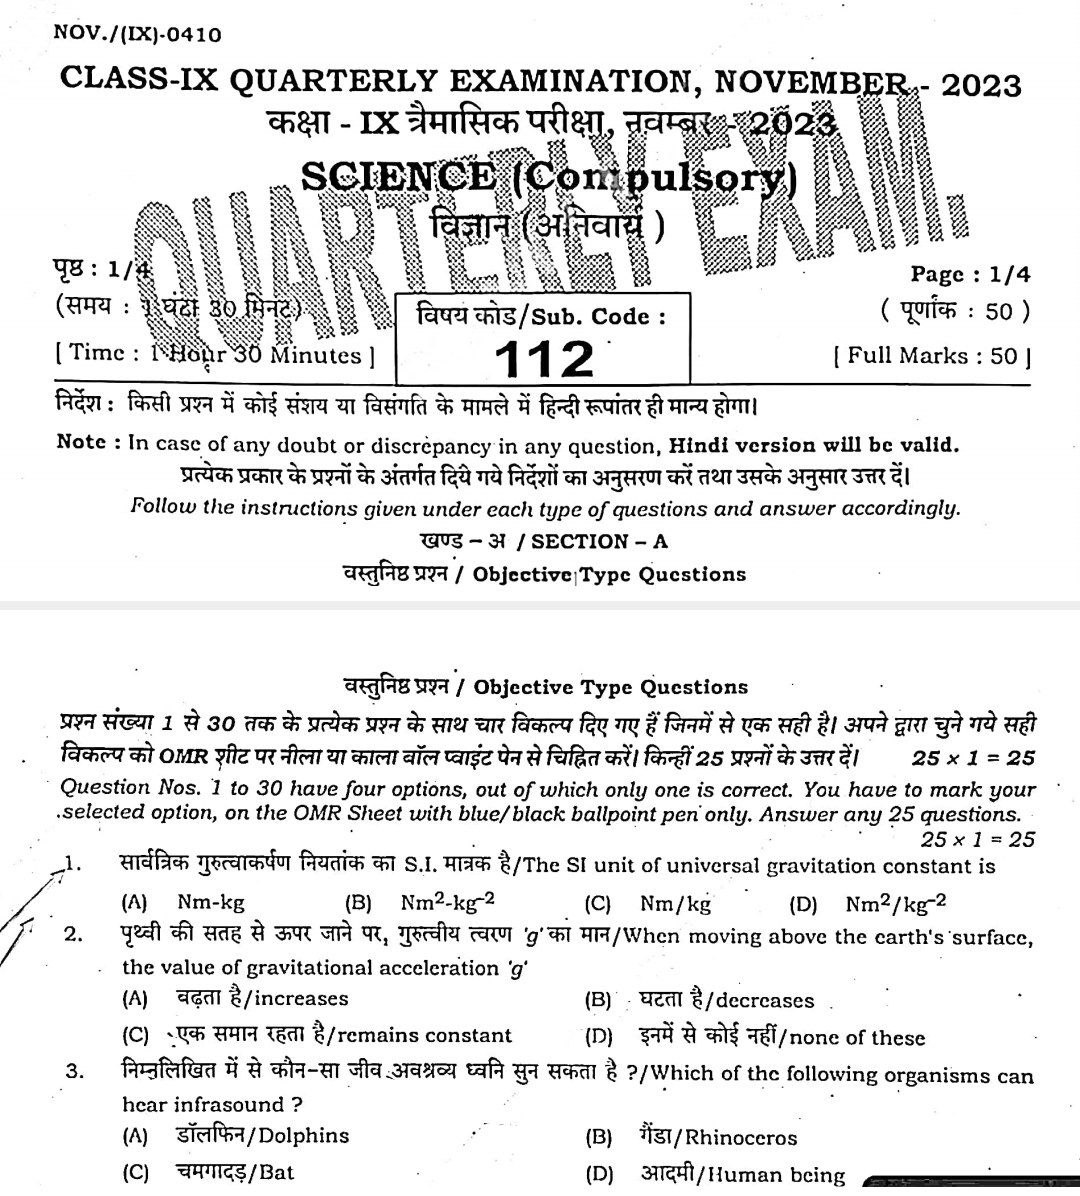 Class 9th Science Quarterly Exam Answer key 2023 (Download)